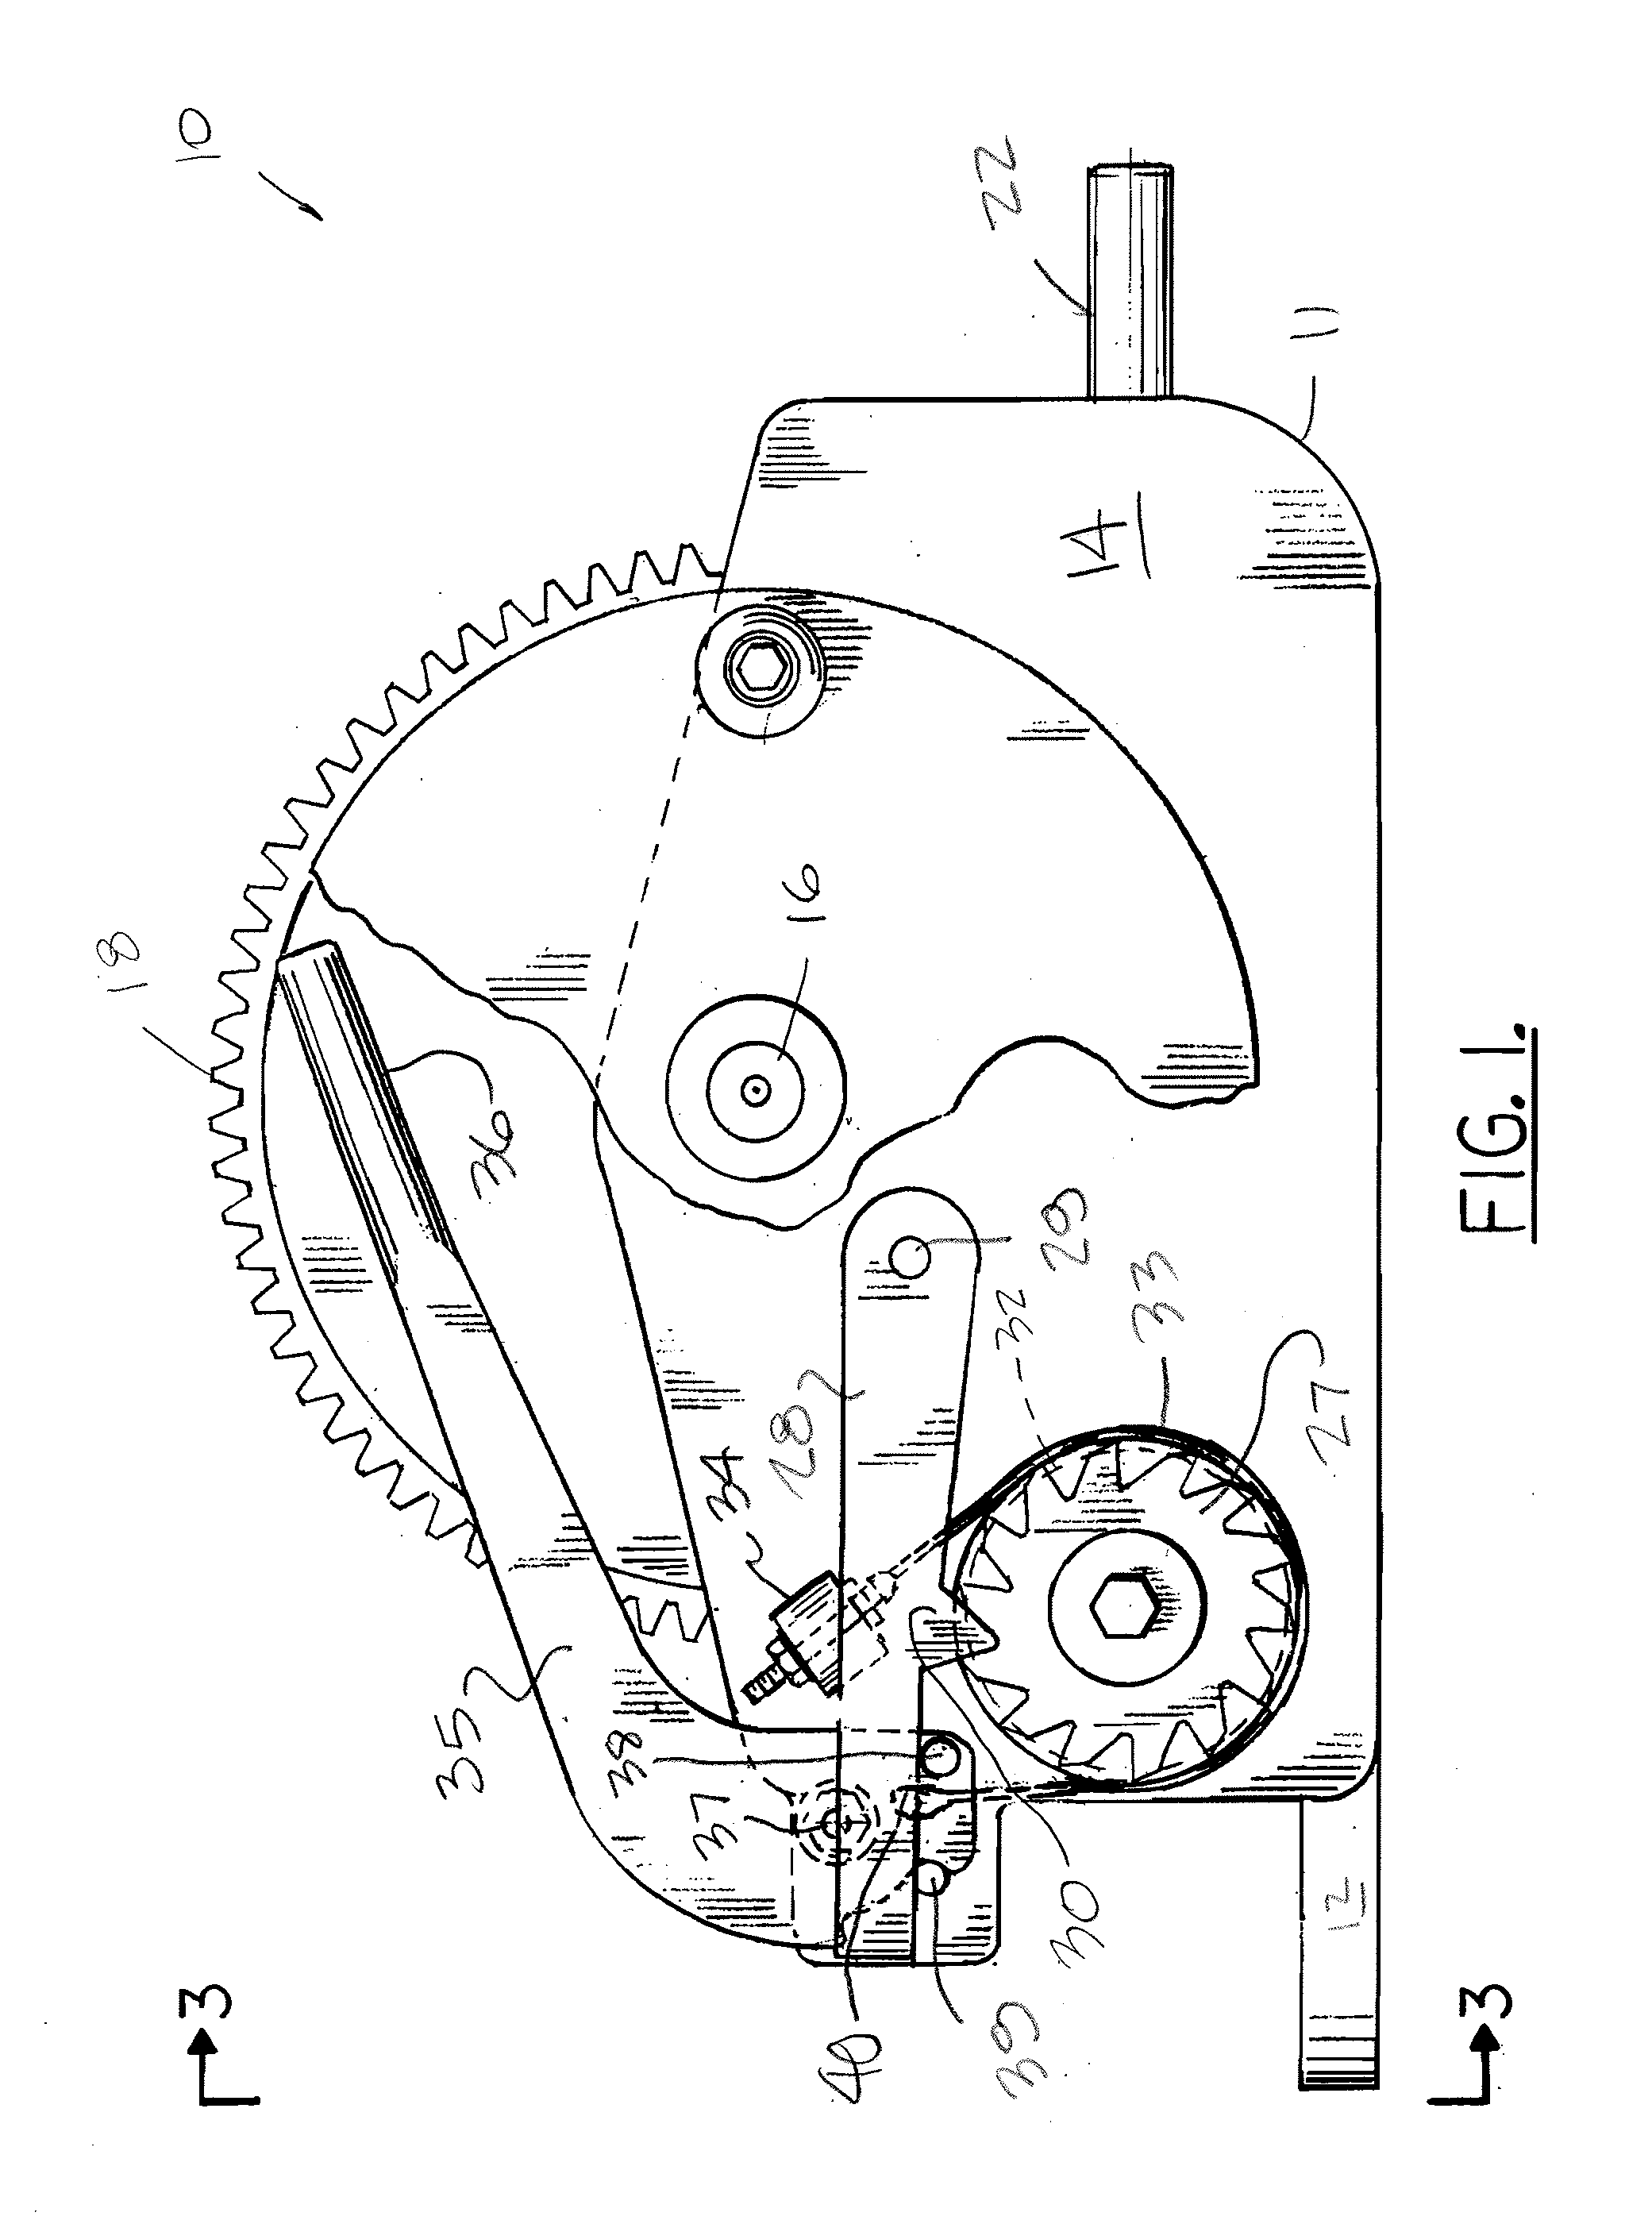 Handle-operated brake/release mechanism for a cable drum winch